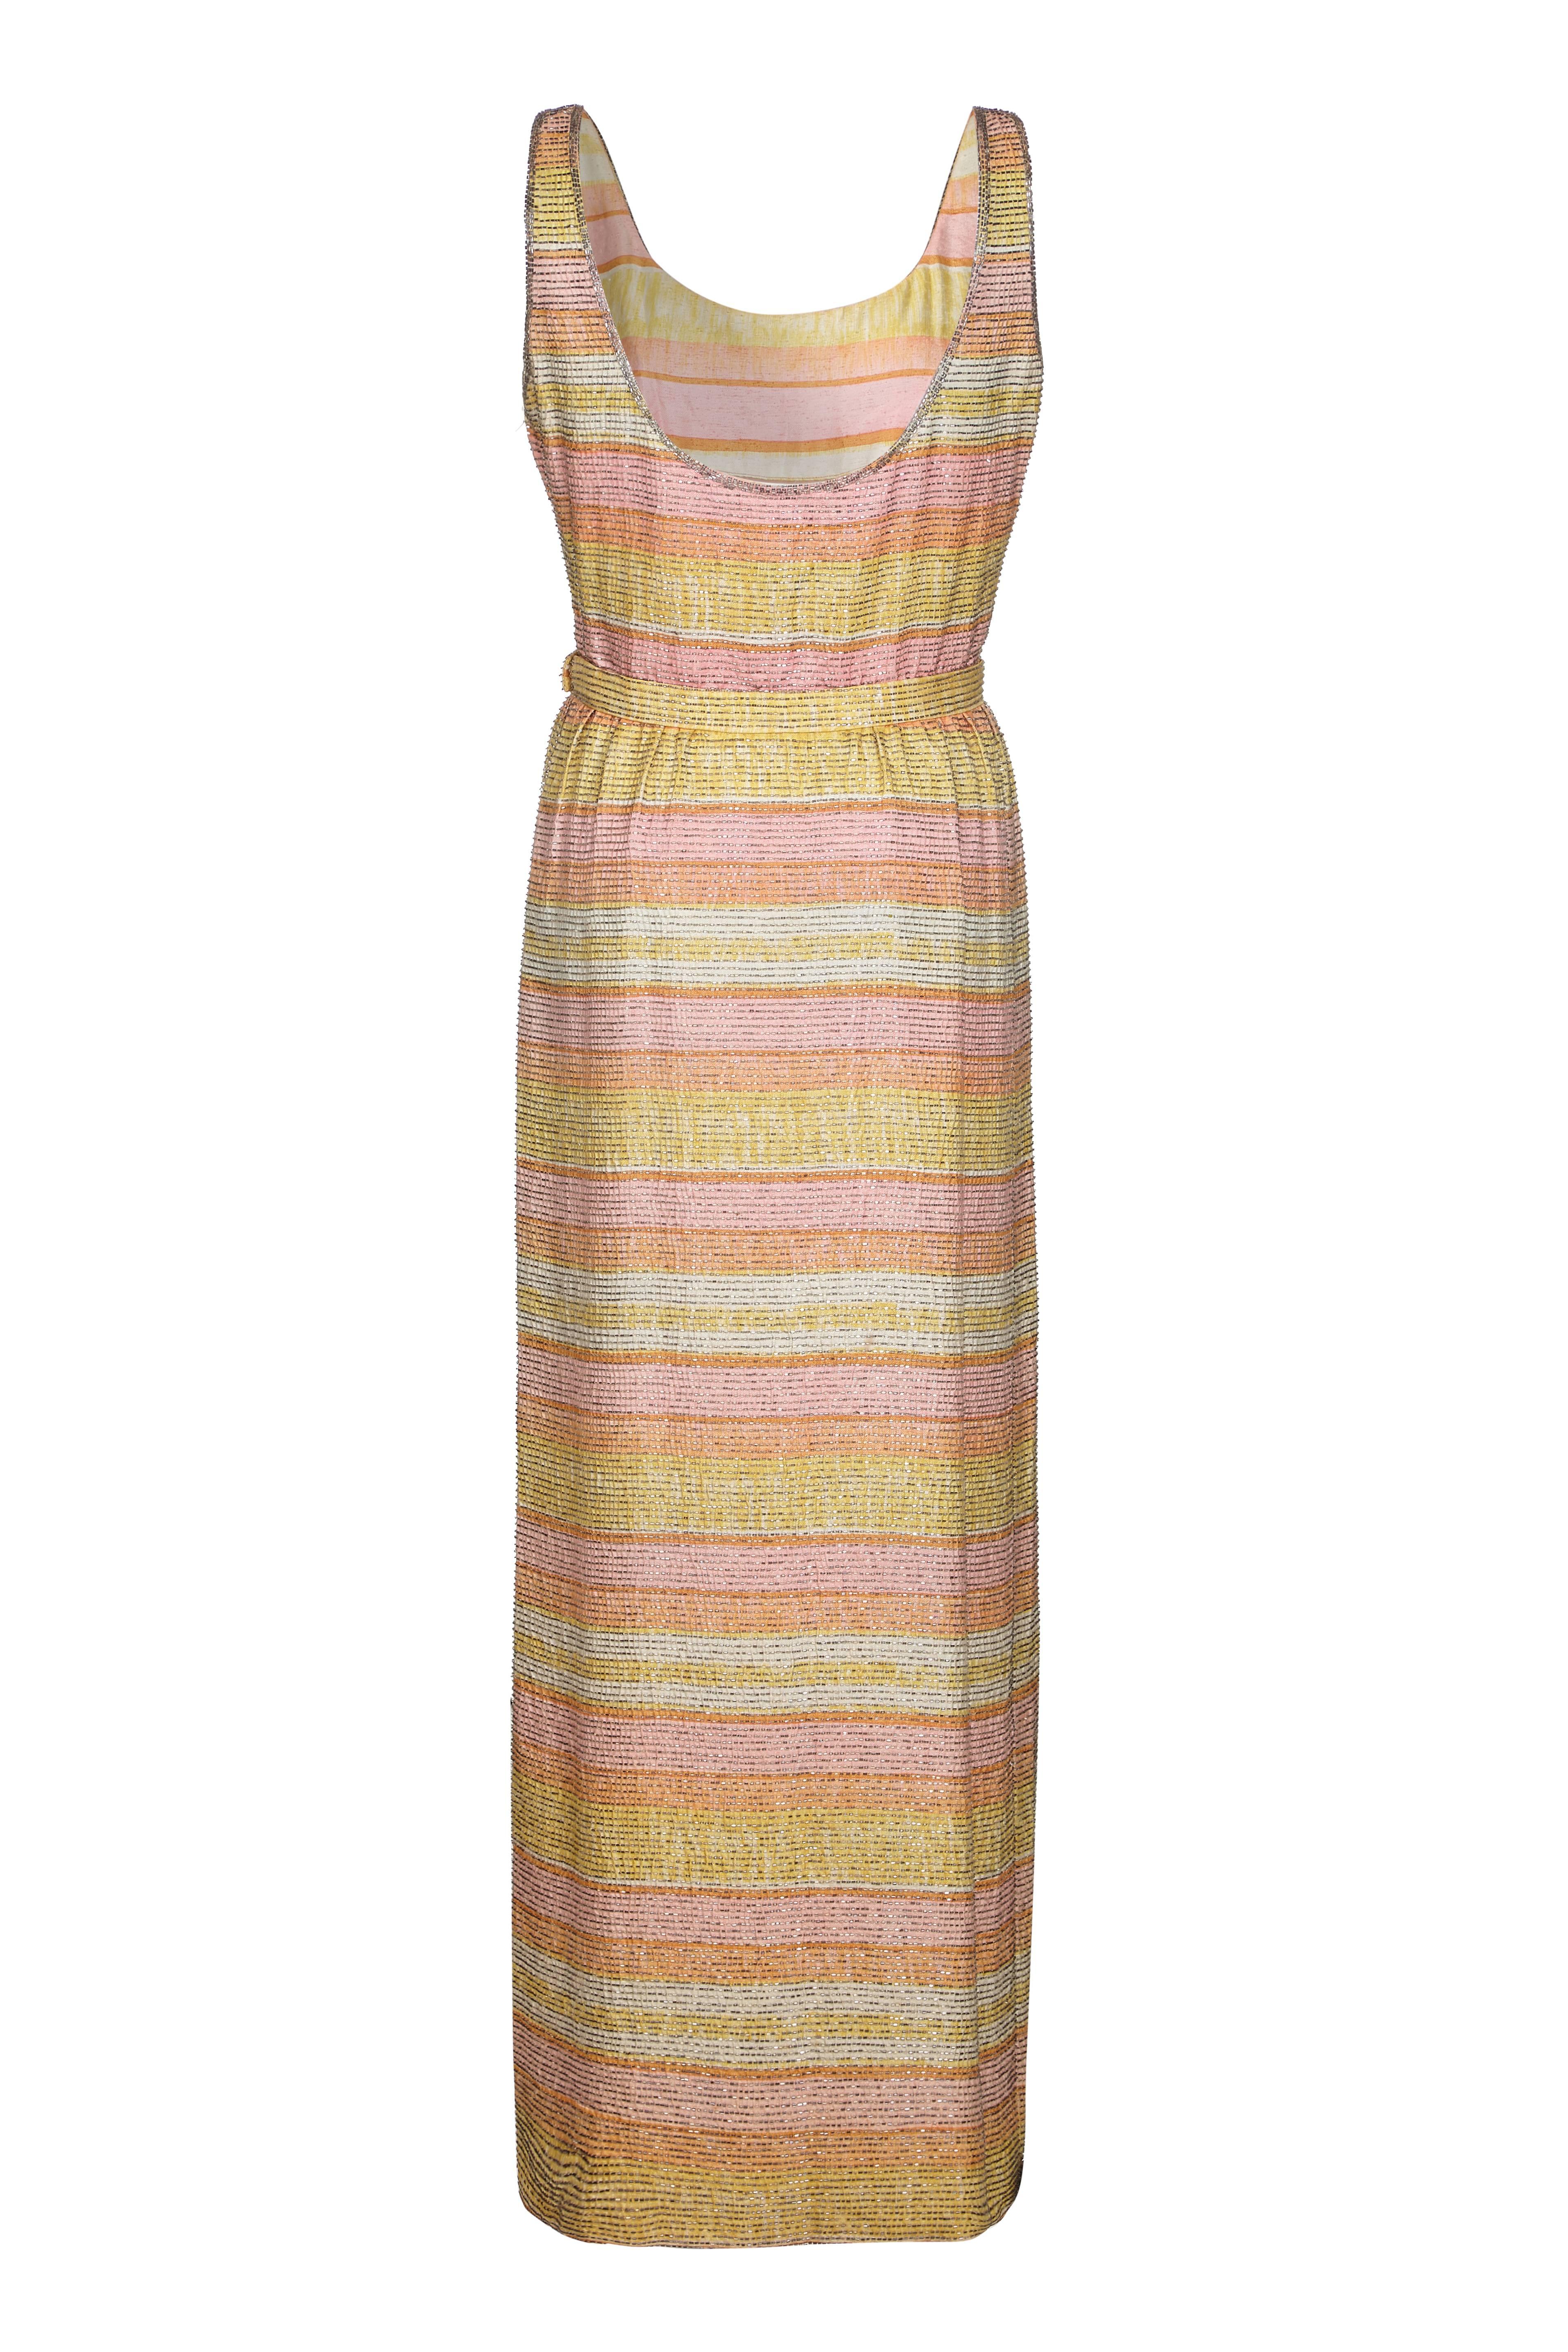 Incredible vintage 1960s Mollie Parnis silk dress in pretty pastel stripes with all over beading.  It is full length with a slit to one side of the skirt, attached waist belt and side zip fastening. A luxurious piece fully lined in silk organza and